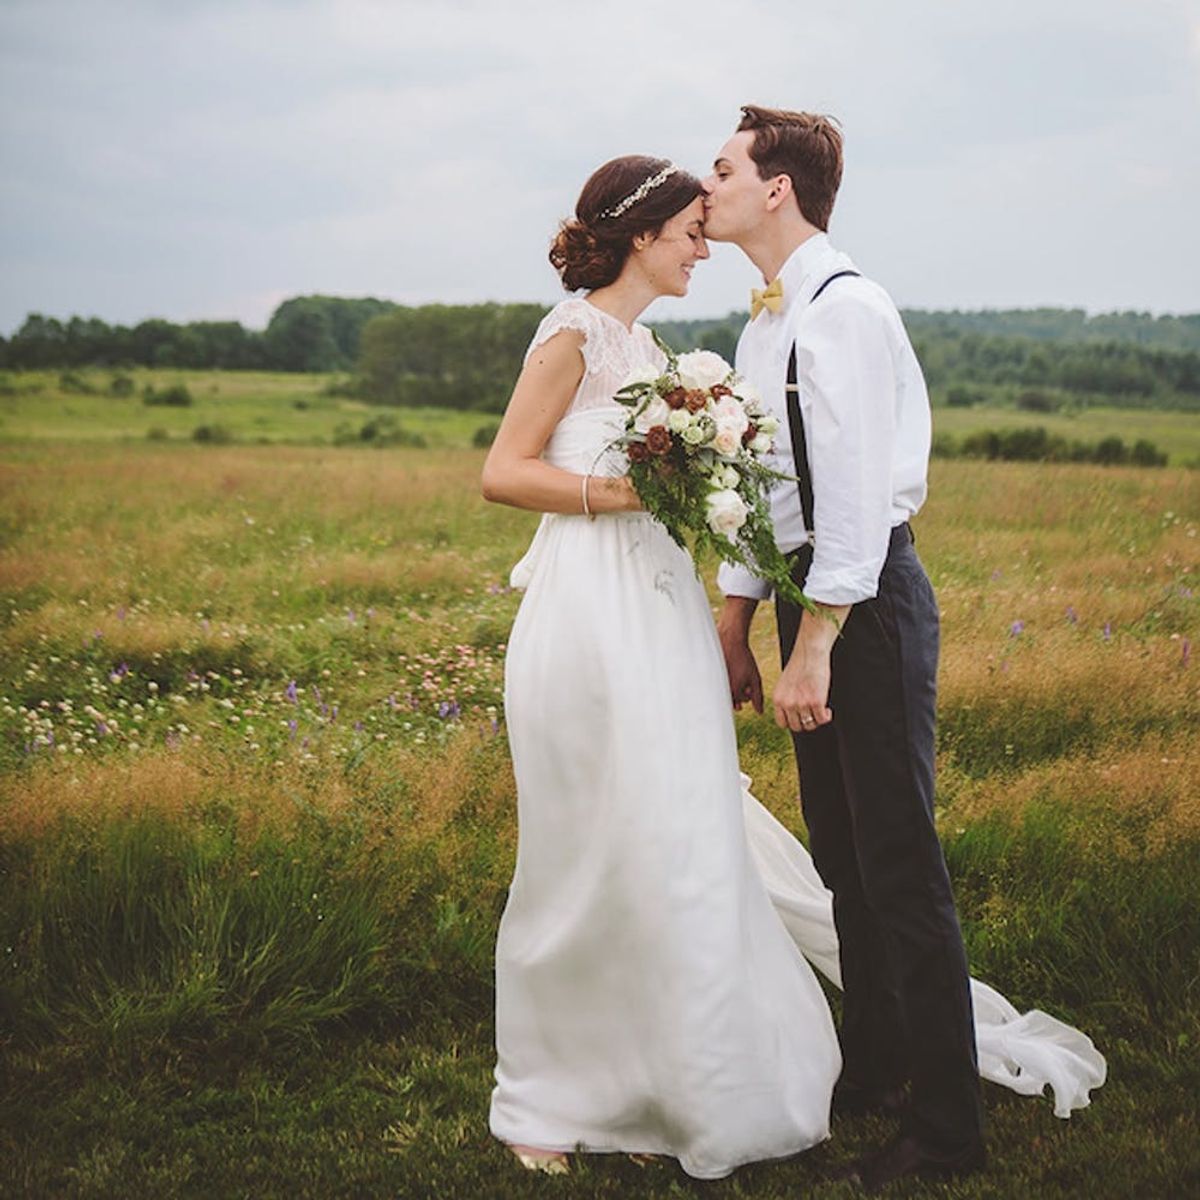 This Romantic Woodland Wedding Is Filled With Pretty, Personal Touches